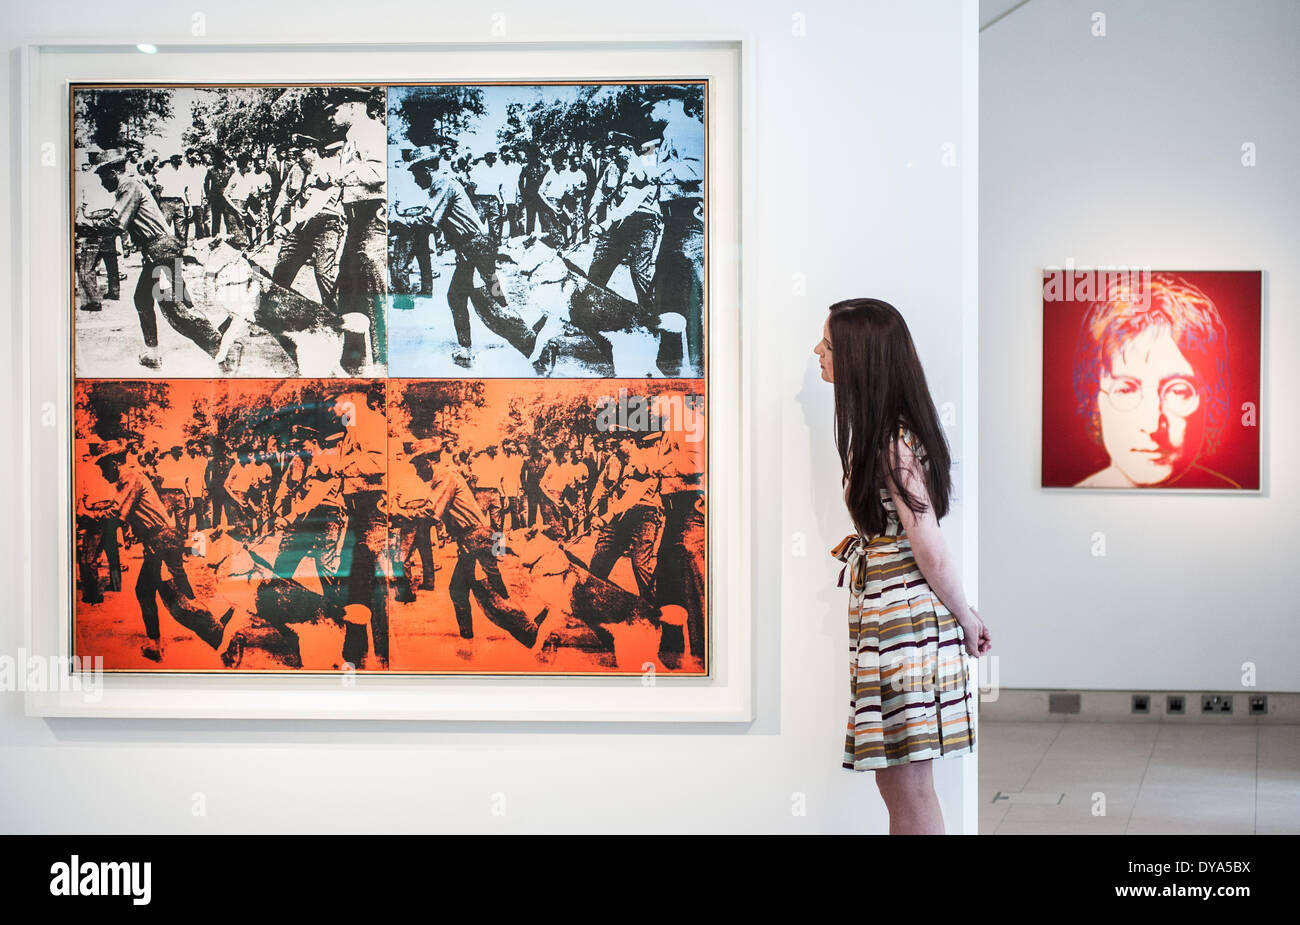 London, UK - 11 April 2014: a Christie’s employee looks at 'Race Riot' by Andy Warhol during the preview of the Post-War and Contemporary Art evening sale that will take place in New York on the 13th May. Credit:  Piero Cruciatti/Alamy Live News Stock Photo